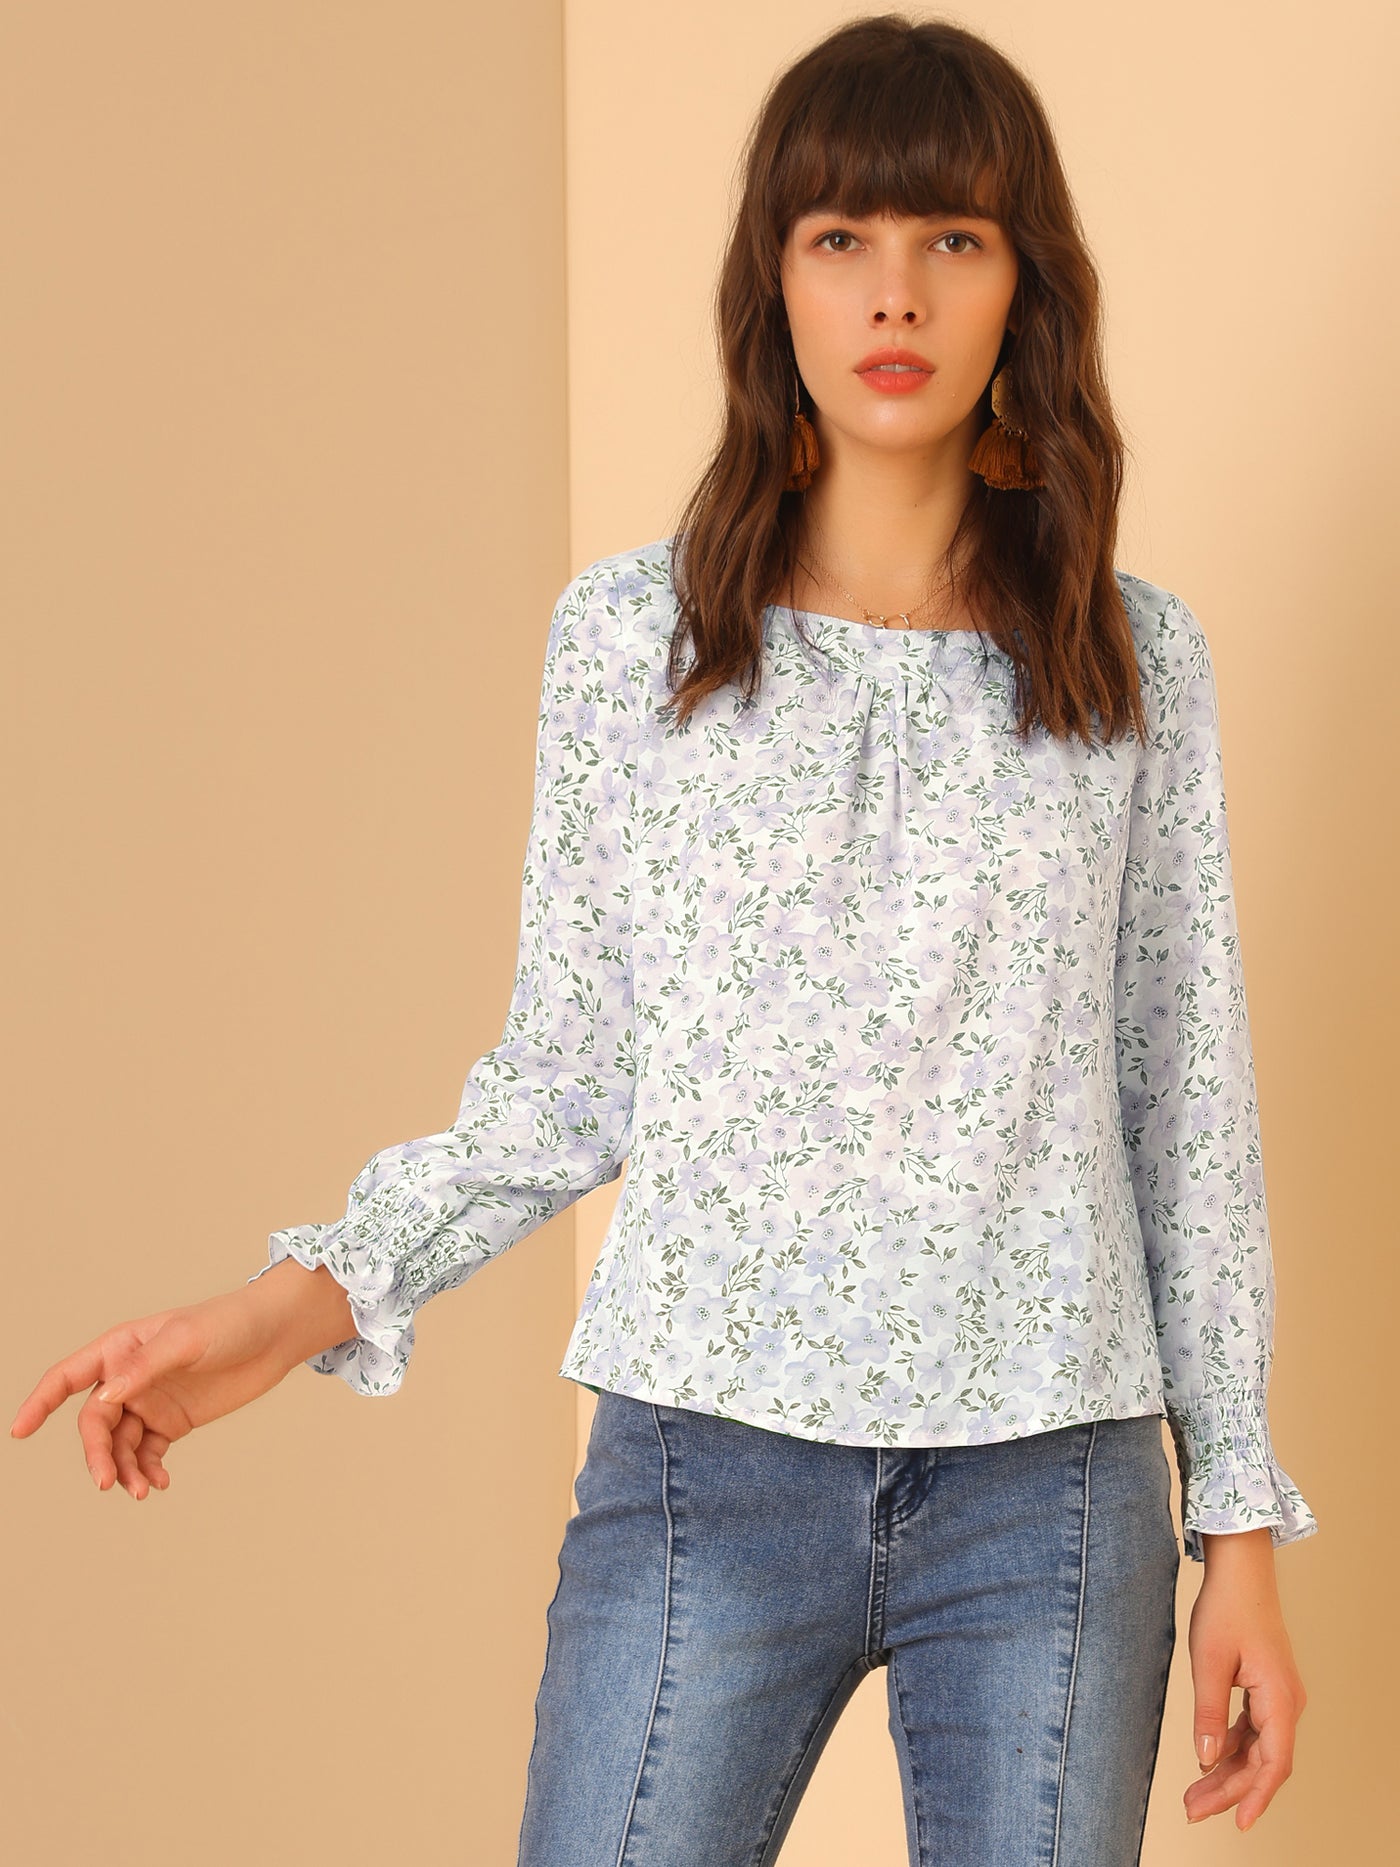 Allegra K Floral Blouse Square Neck Ruffled Long Sleeve Chiffon Peasant Top